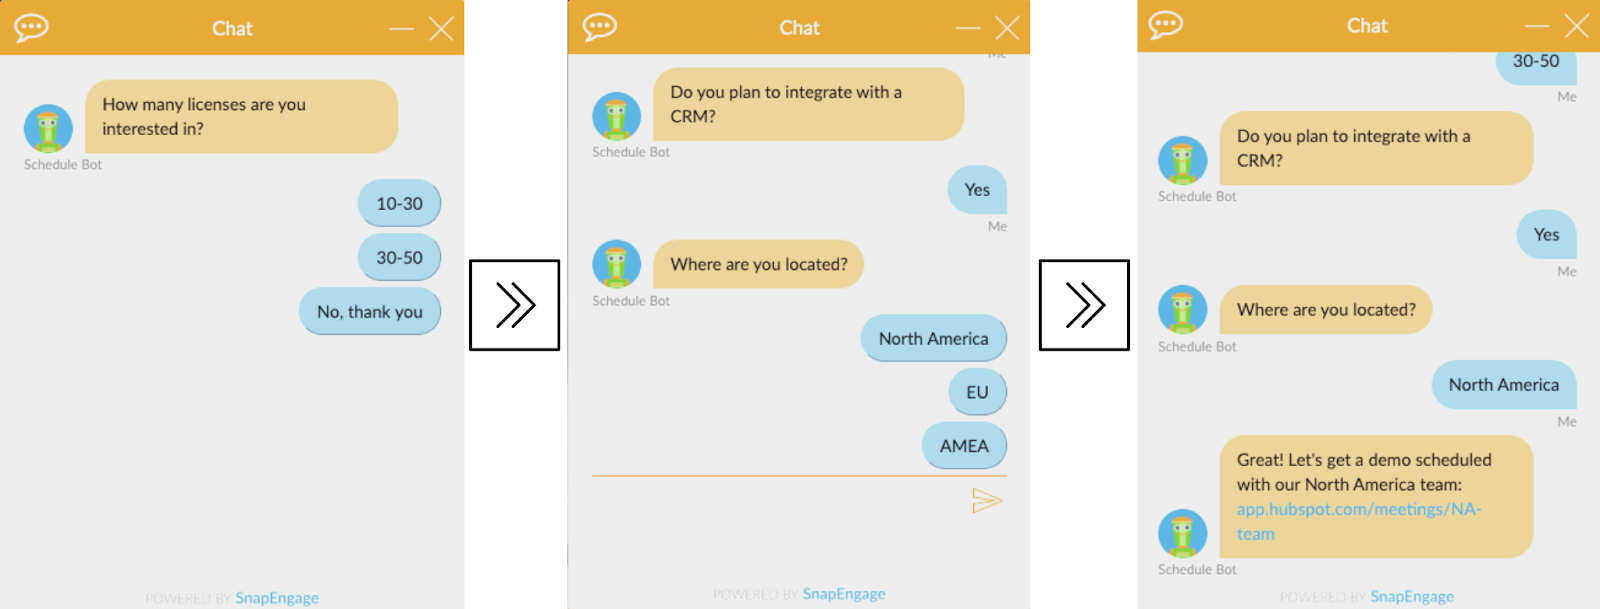 Route Chat Conversations Using GuideBot